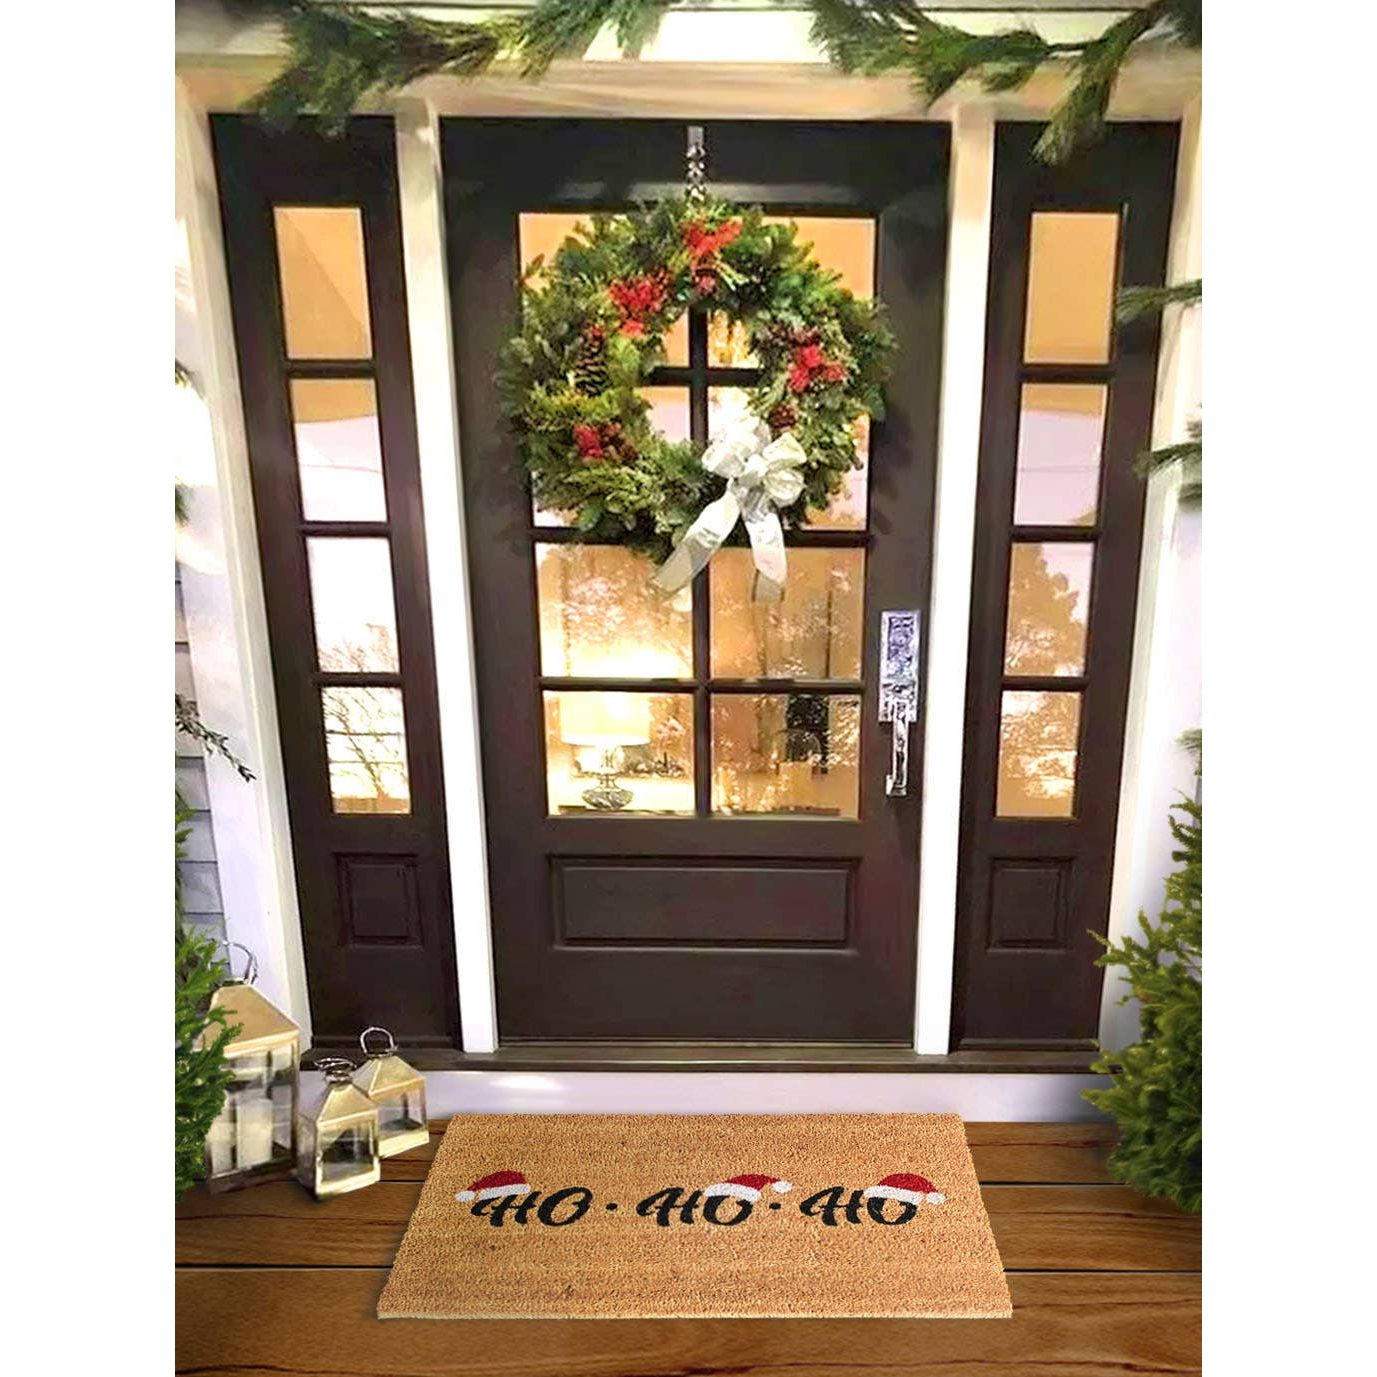 RugSmith Red Machine Tufted Ho Ho Ho Doormat, 18" x 30"Heart